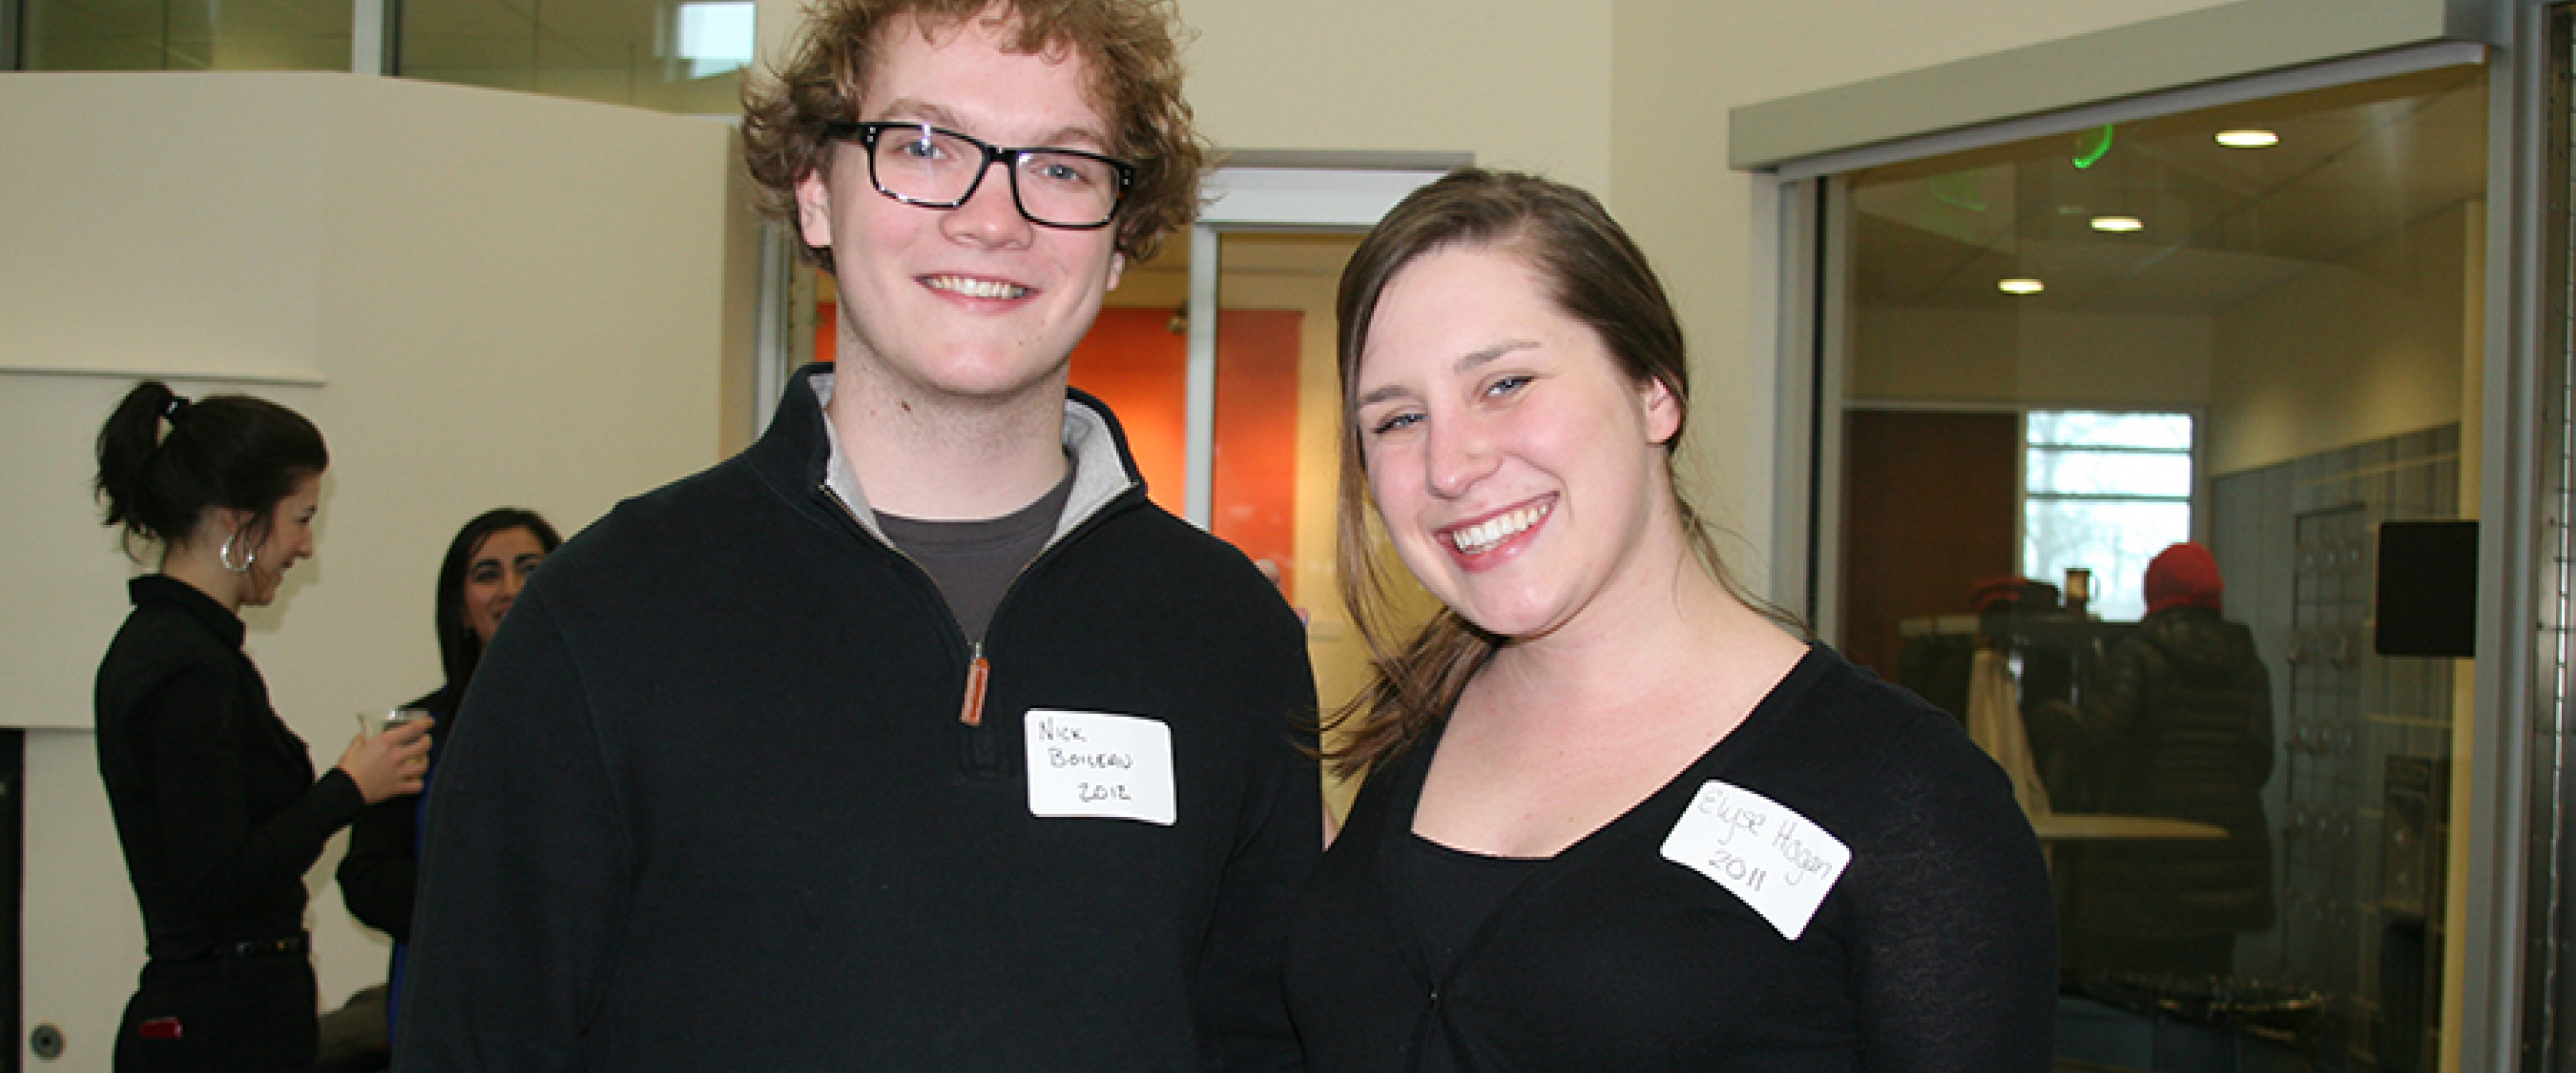 One male and one female Medallion alum attending a reunion in the honors college lounge.